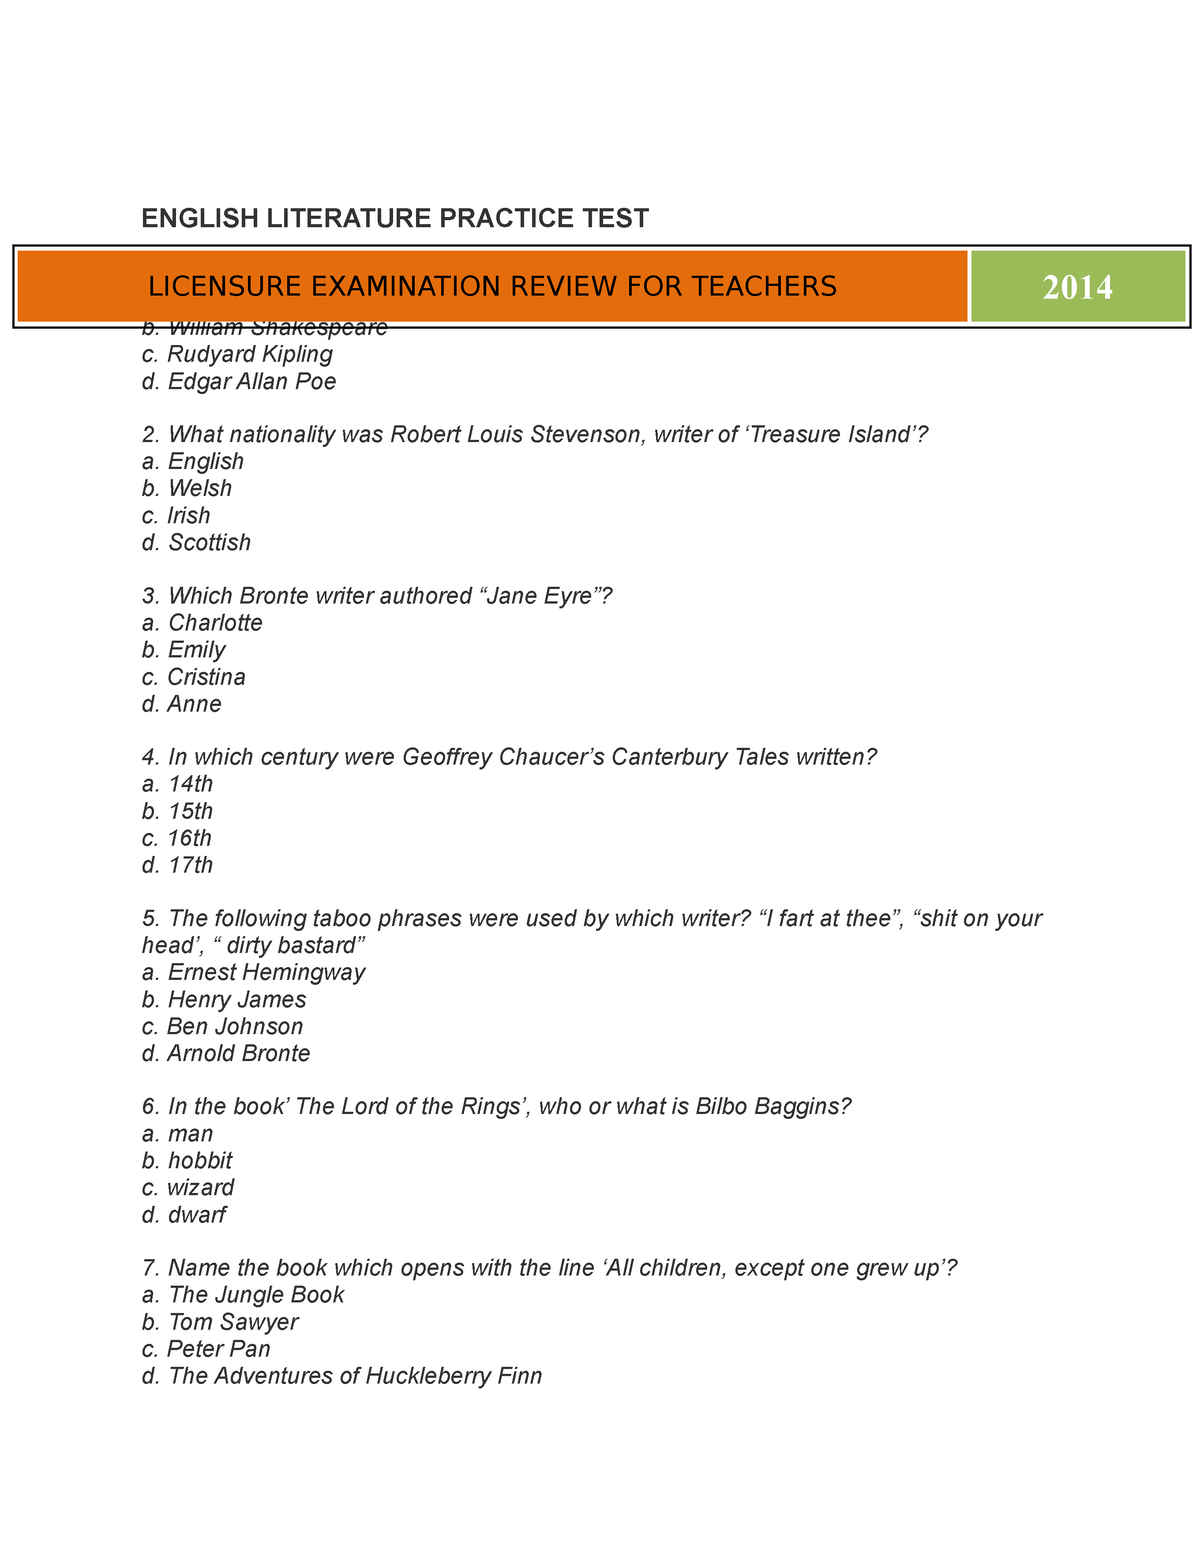 english-practice-test-1-english-literature-practice-test-who-wrote